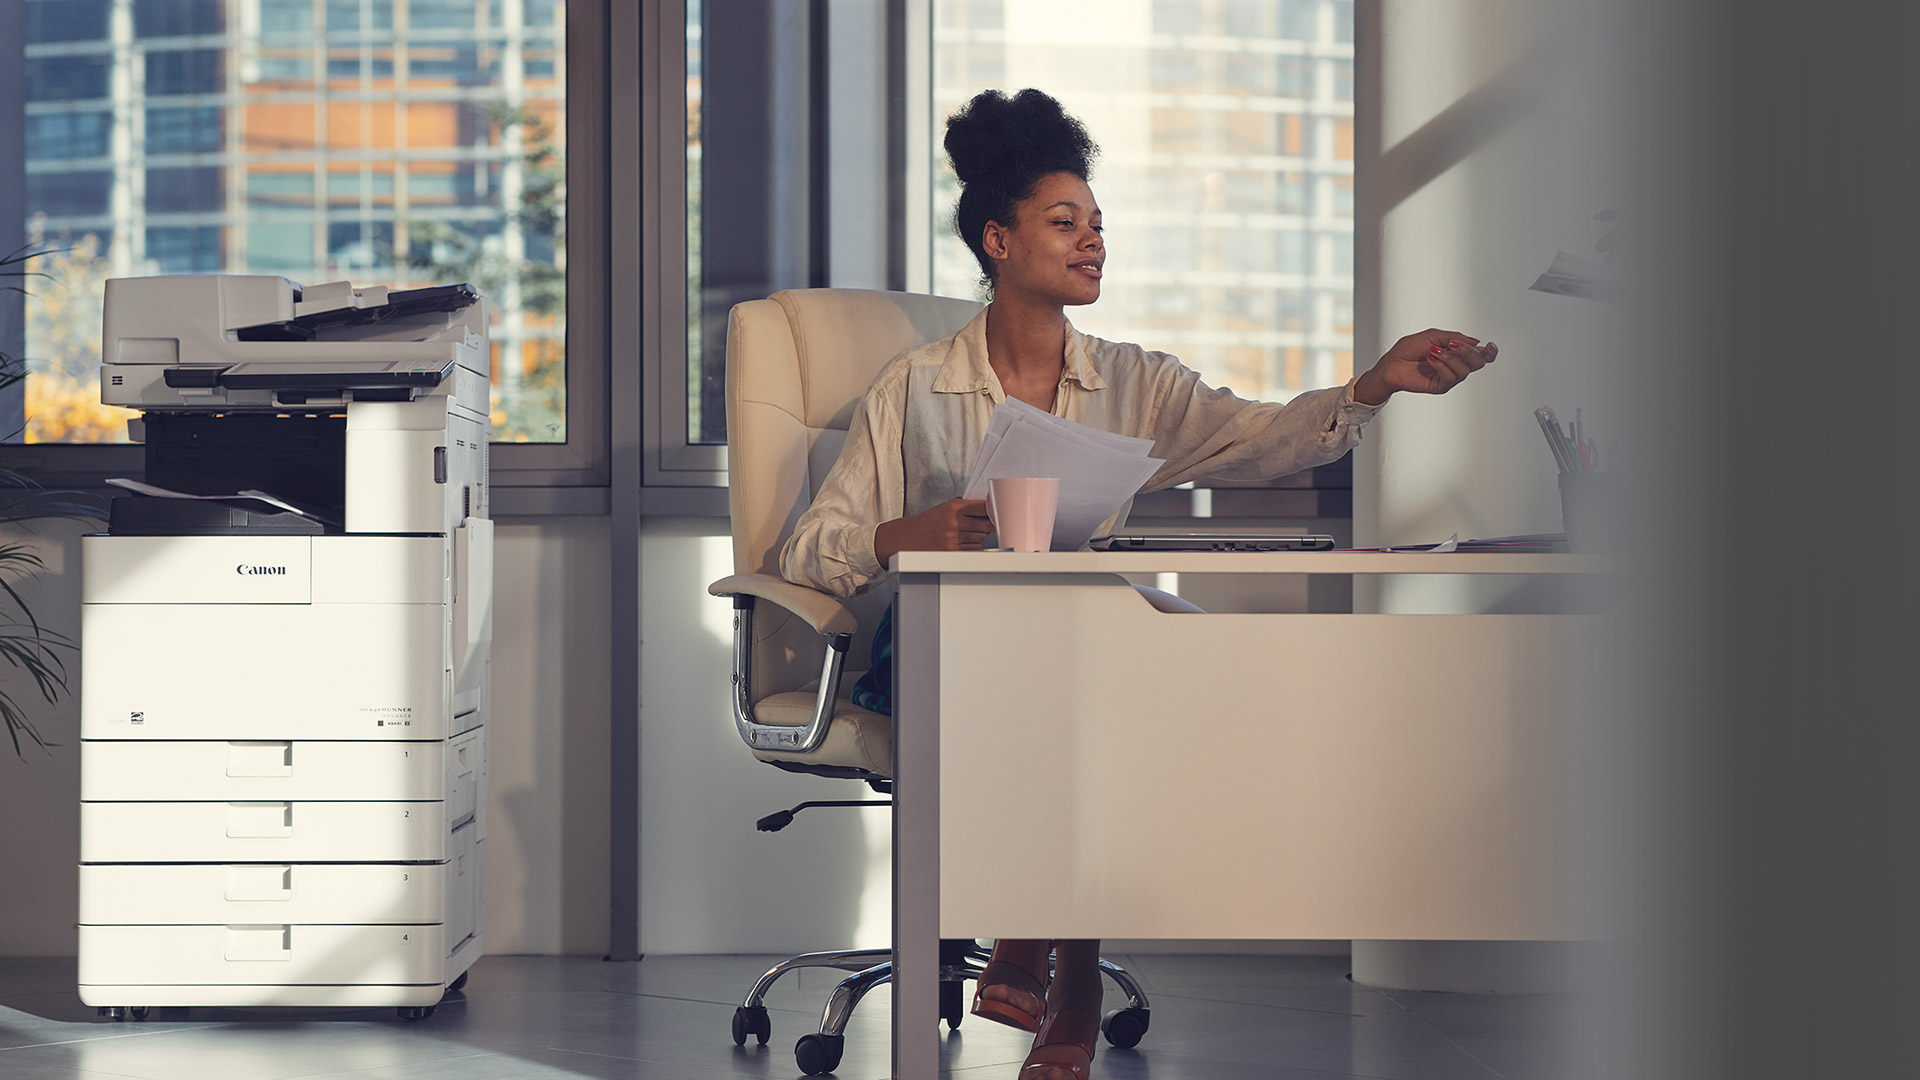 Woman working in office, Canon printer to her side